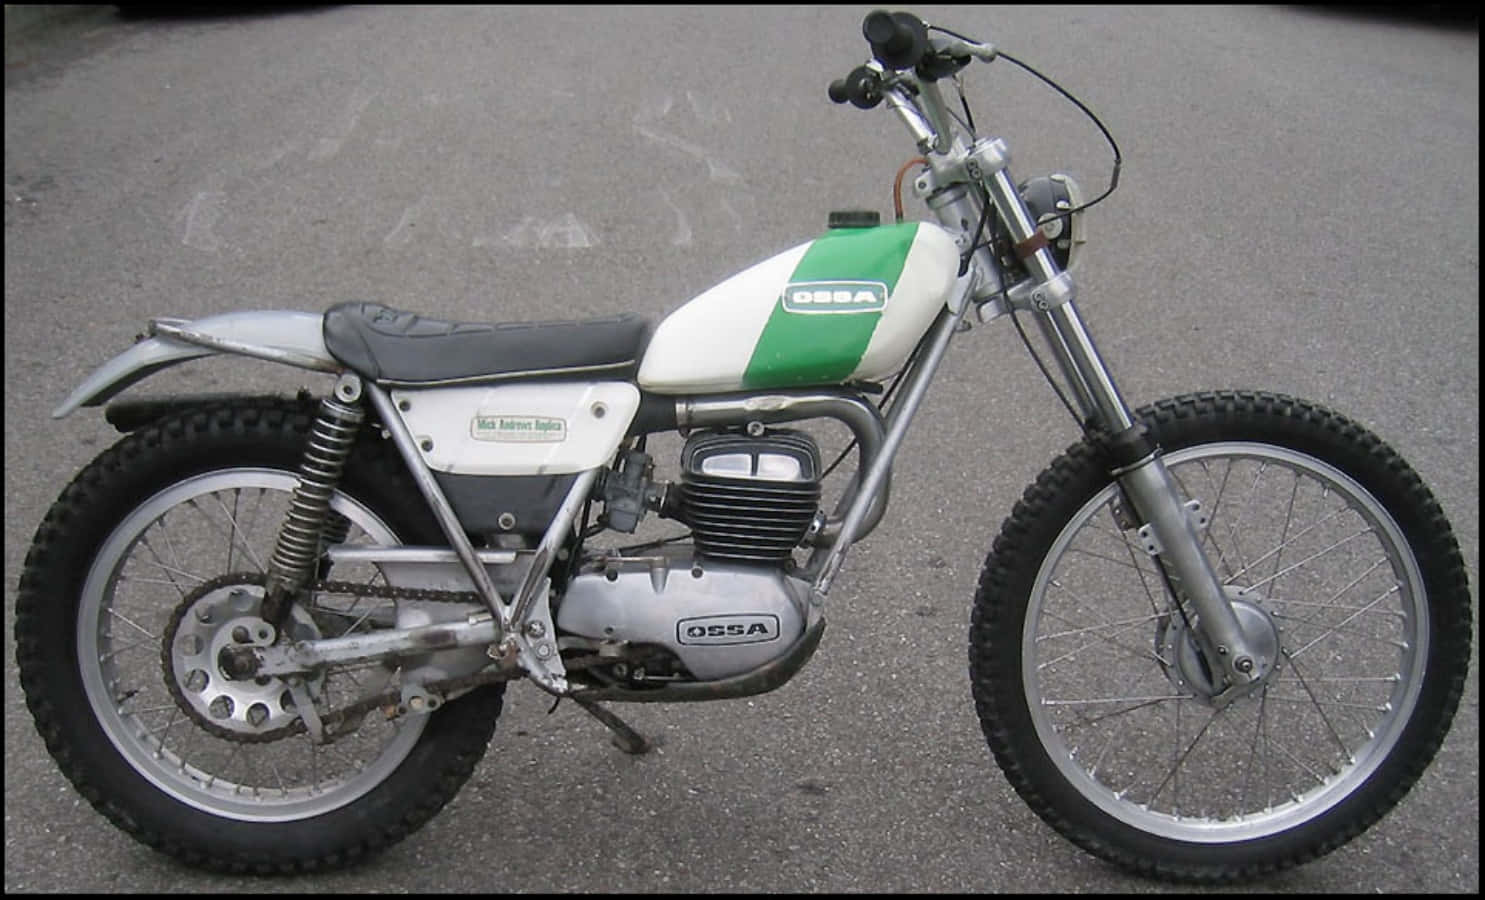 Vintage Ossa Trial Motorcycle Wallpaper